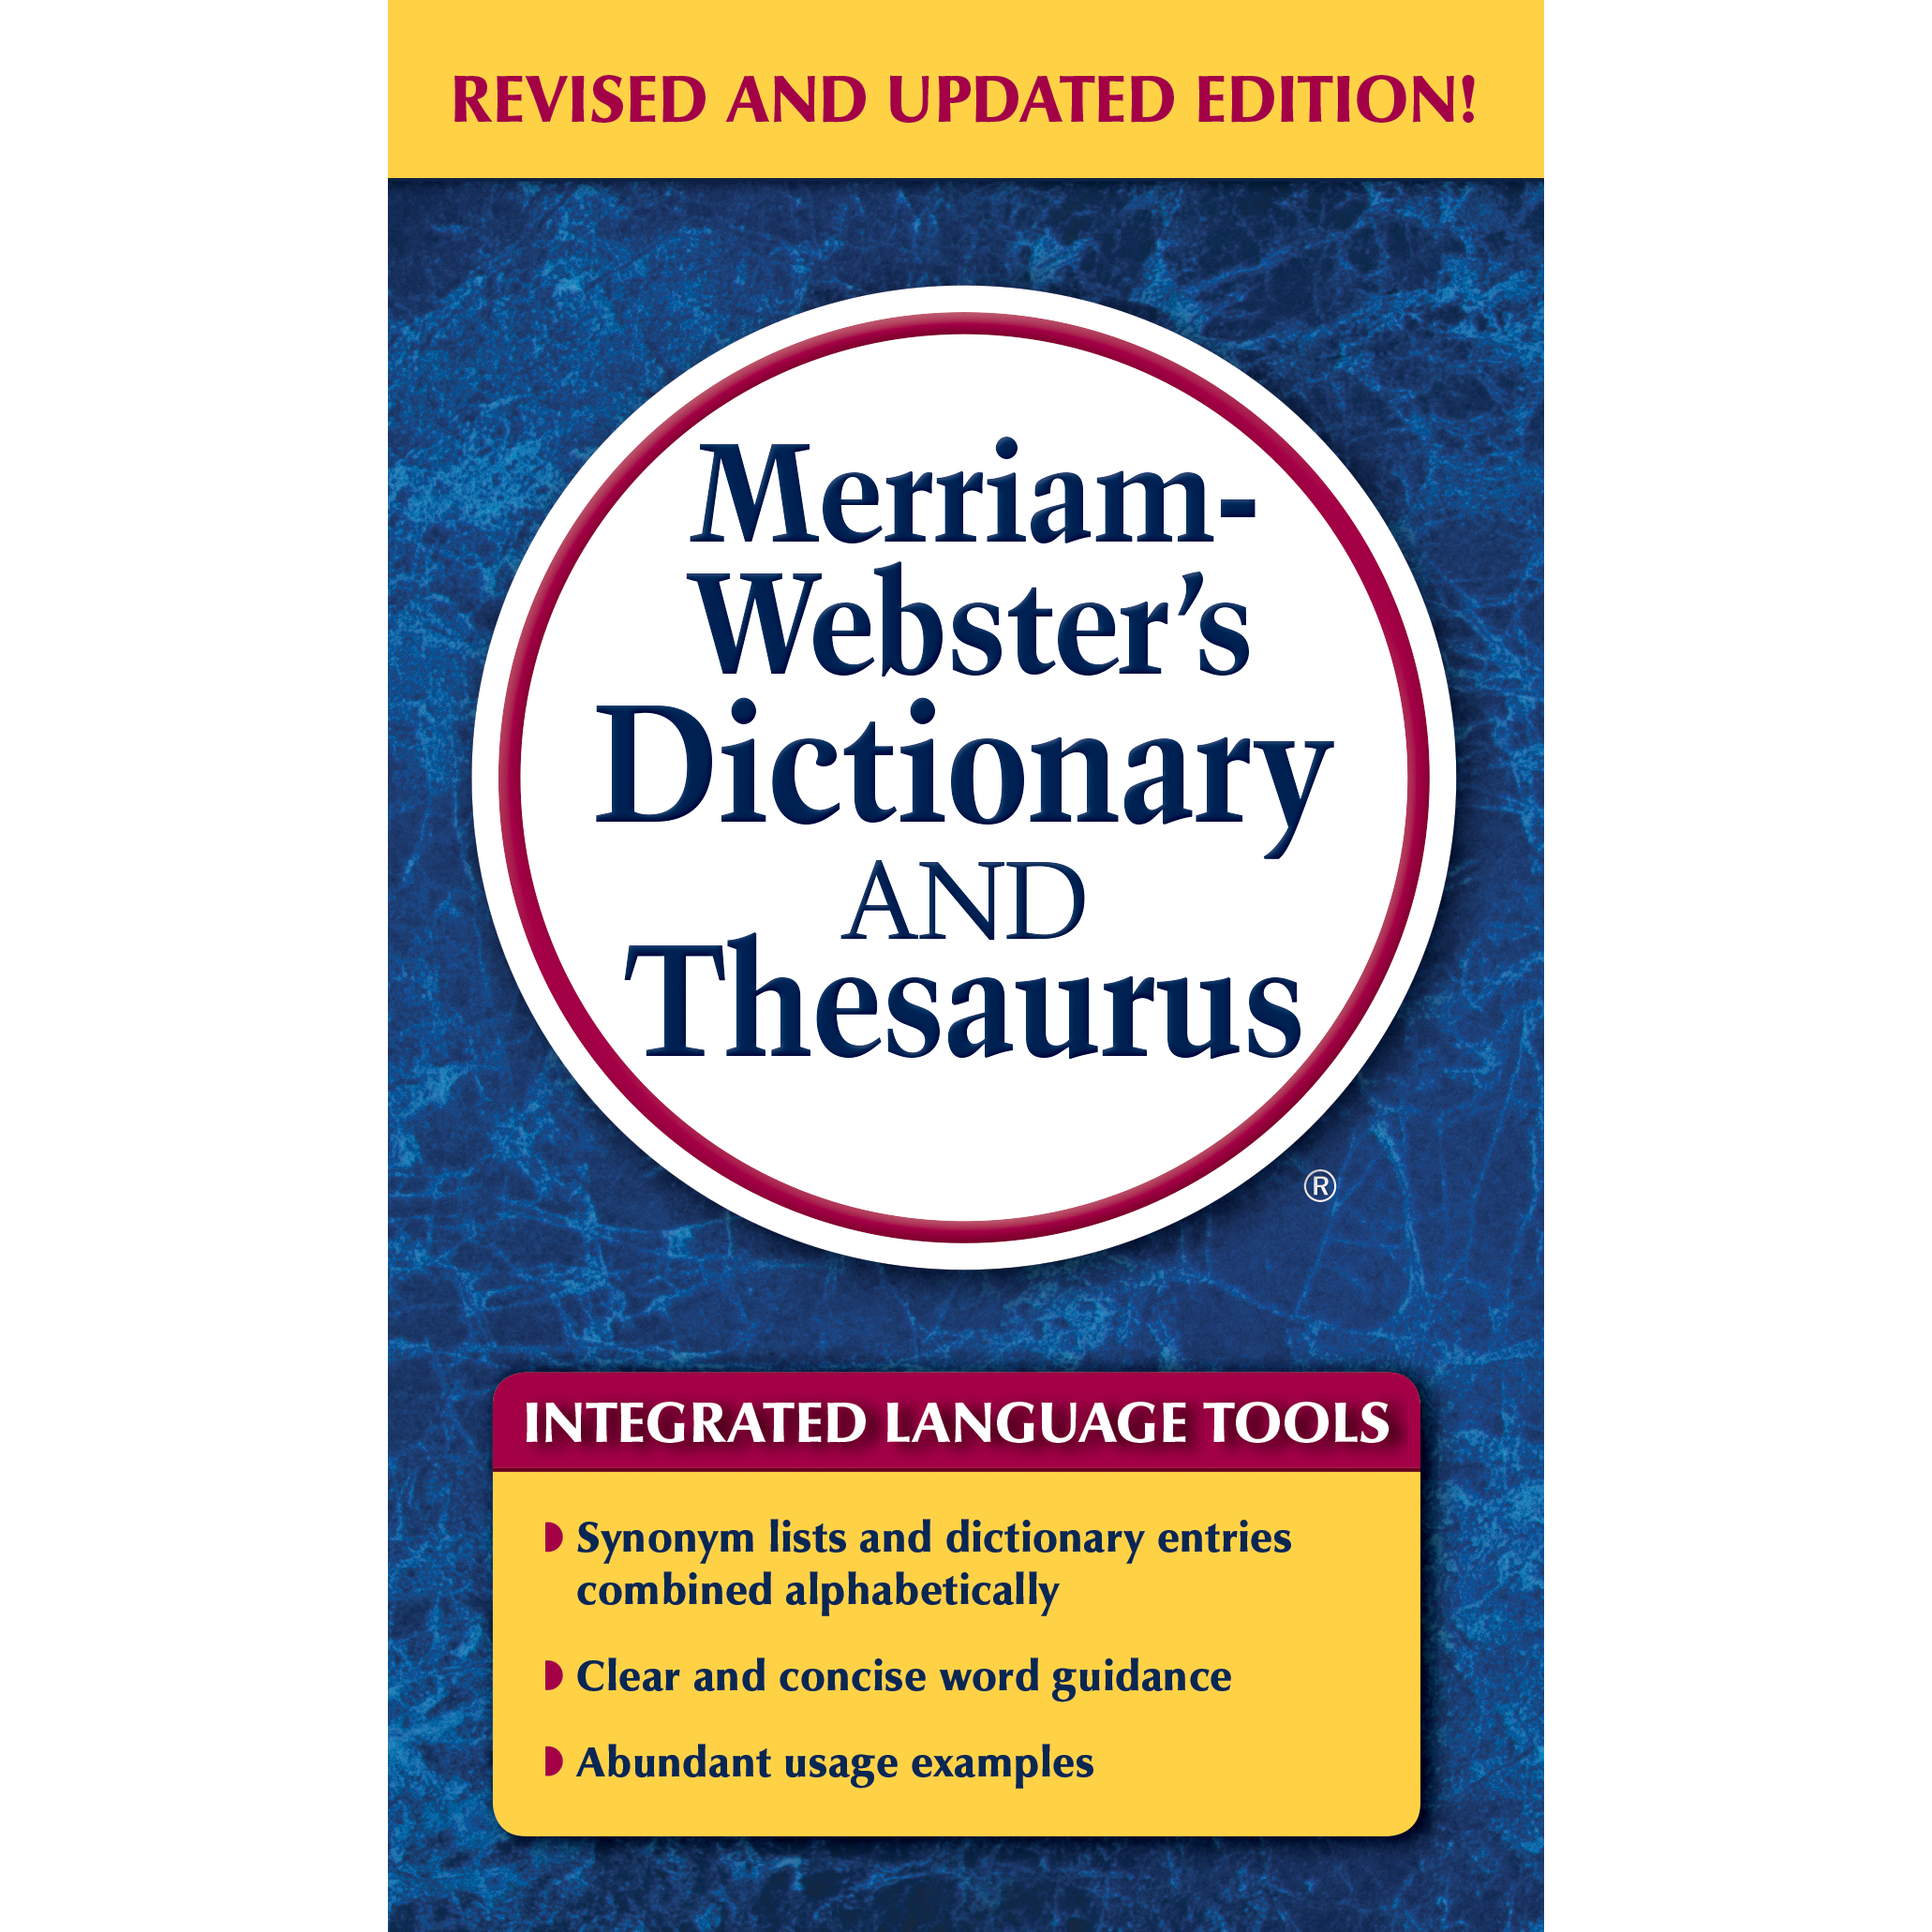 Thesaurus page with synonyms